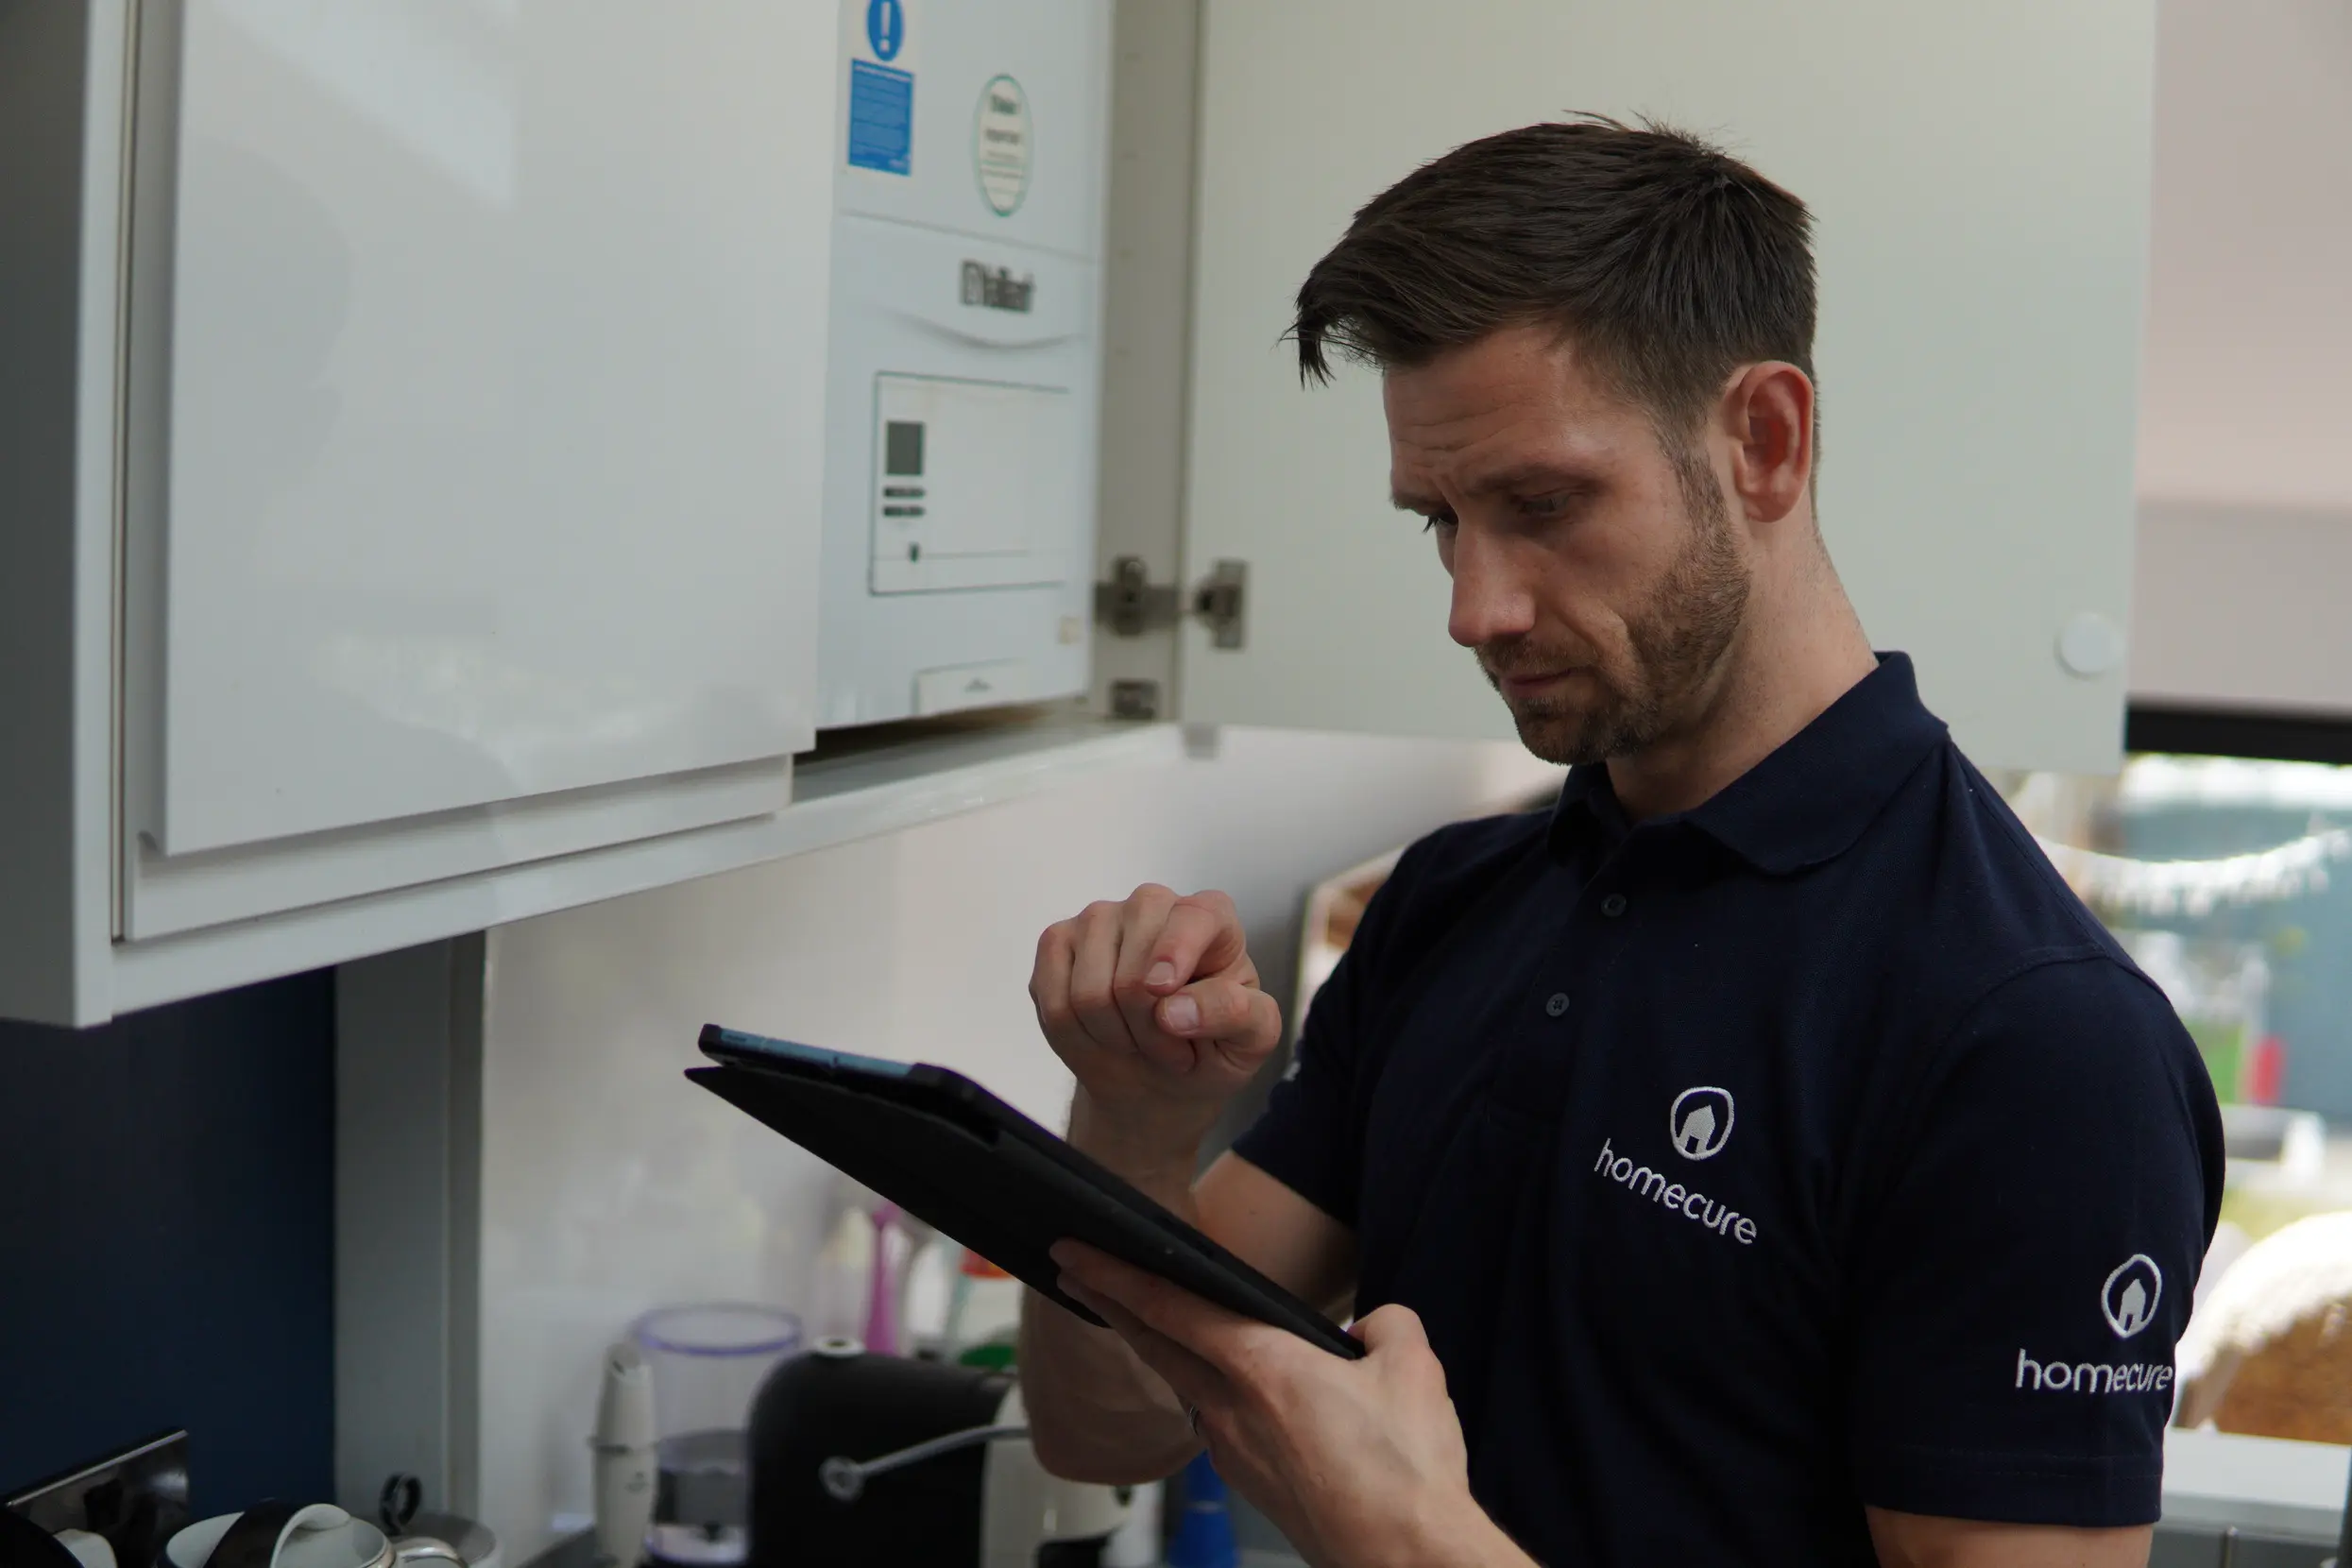 An employee holding a tablet while servicing the boiler